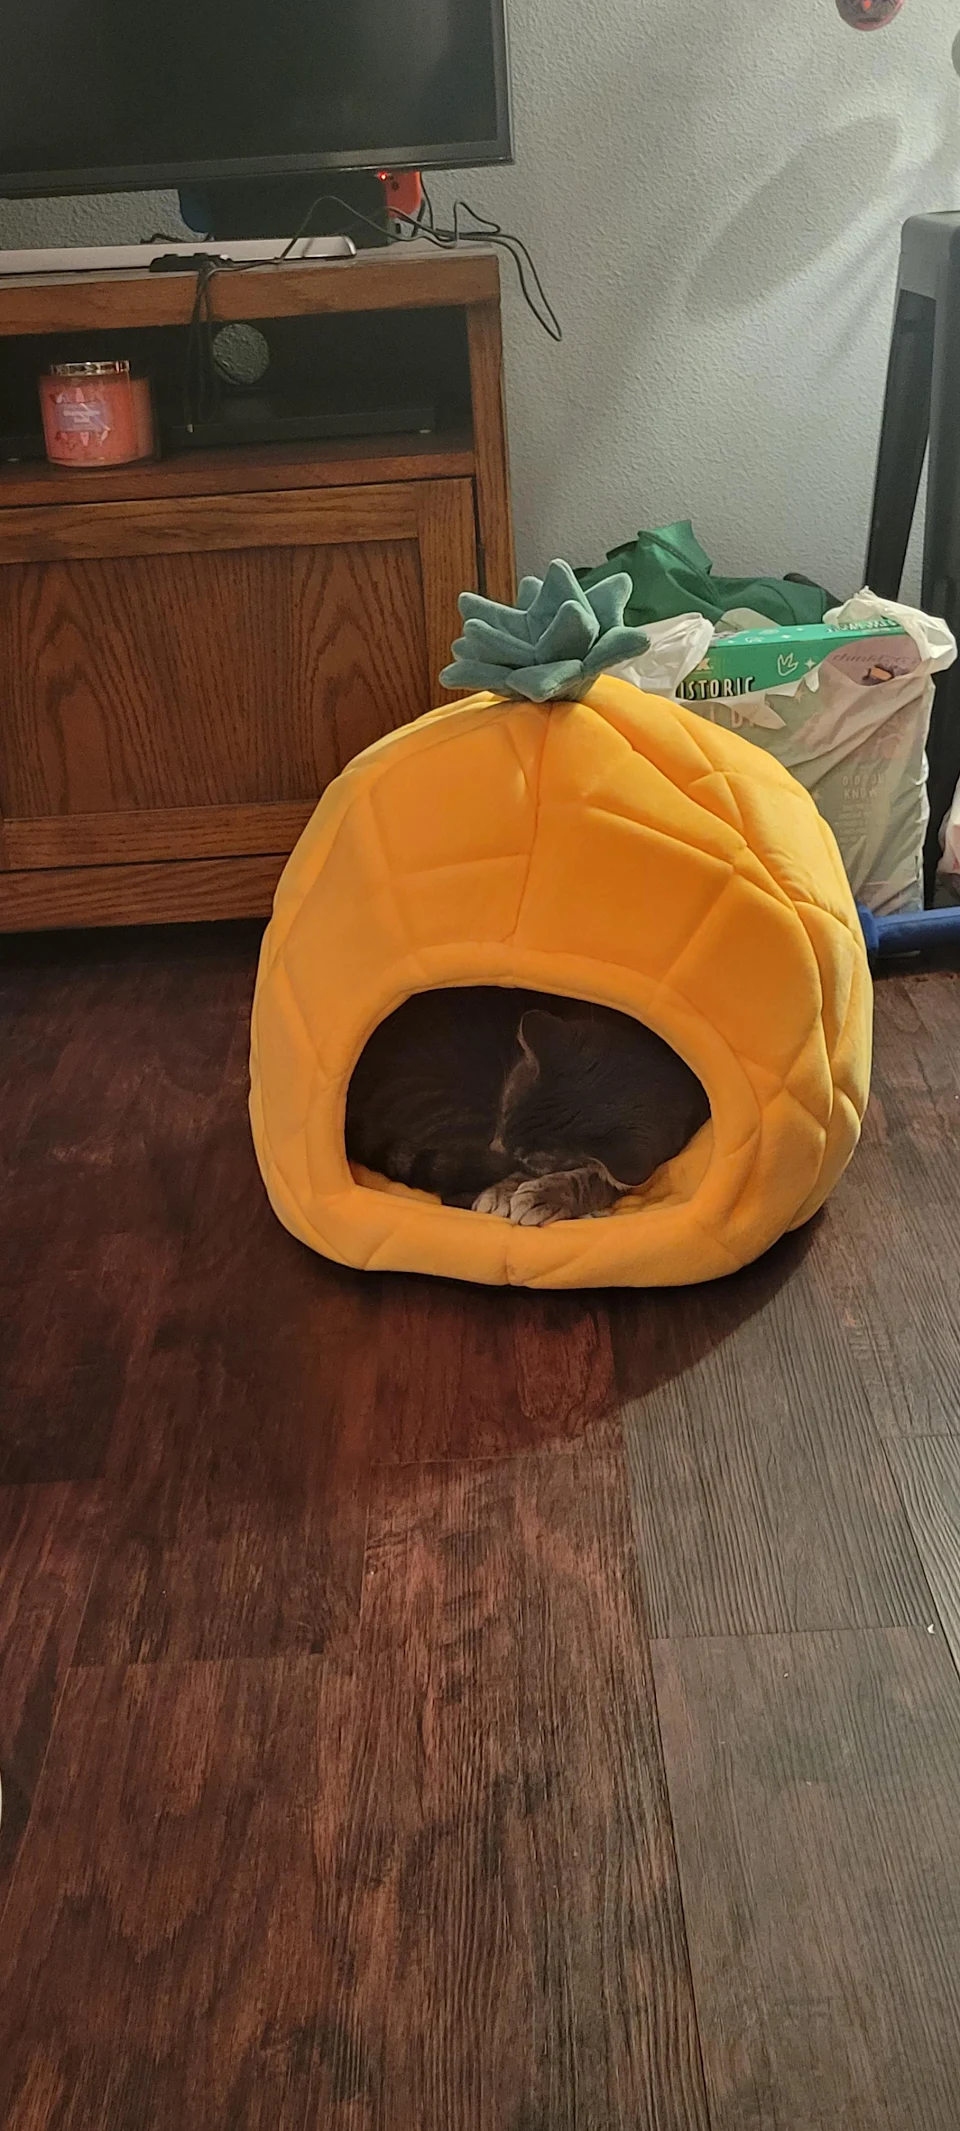 My little man loves napping in his pineapple